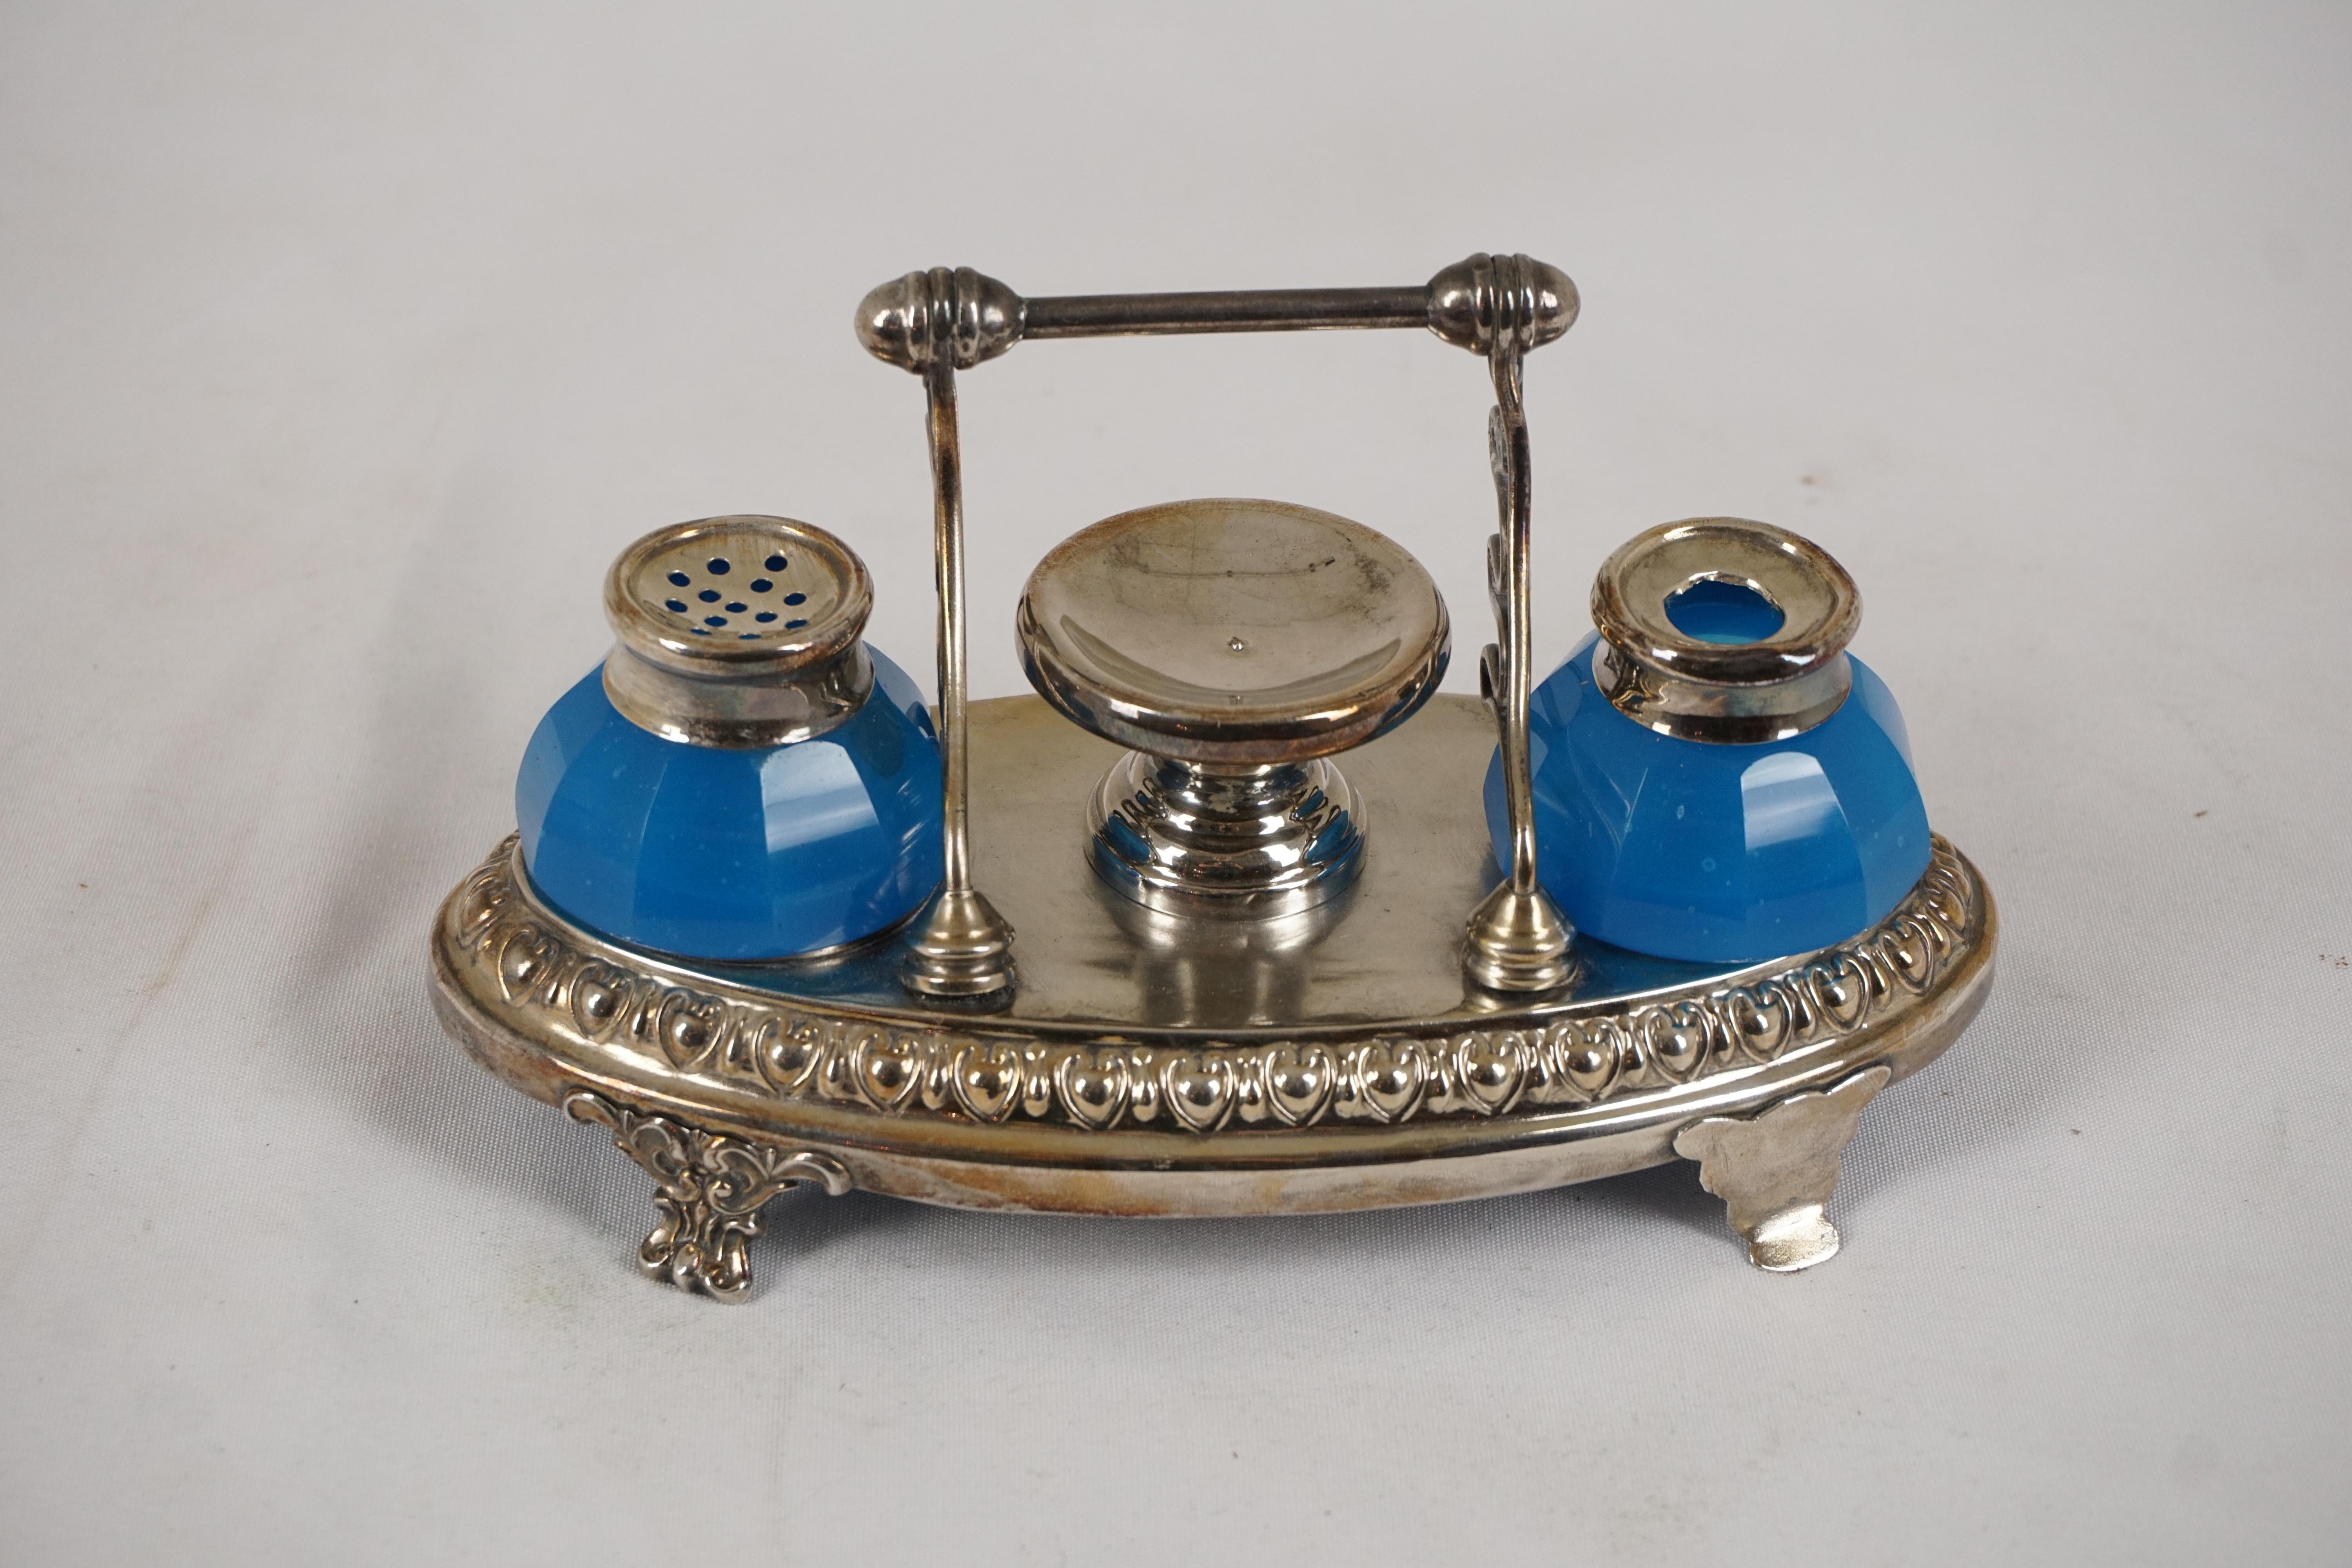 Antique Oval Silver Plated Double Inkstand, Scotland 1910, H549

Scotland 1910
Silver plate and glass
Silver plated inkstand having two blue glass inkwells
A handle with three pen rests to the back
With a stamp holder to the center
Please note one